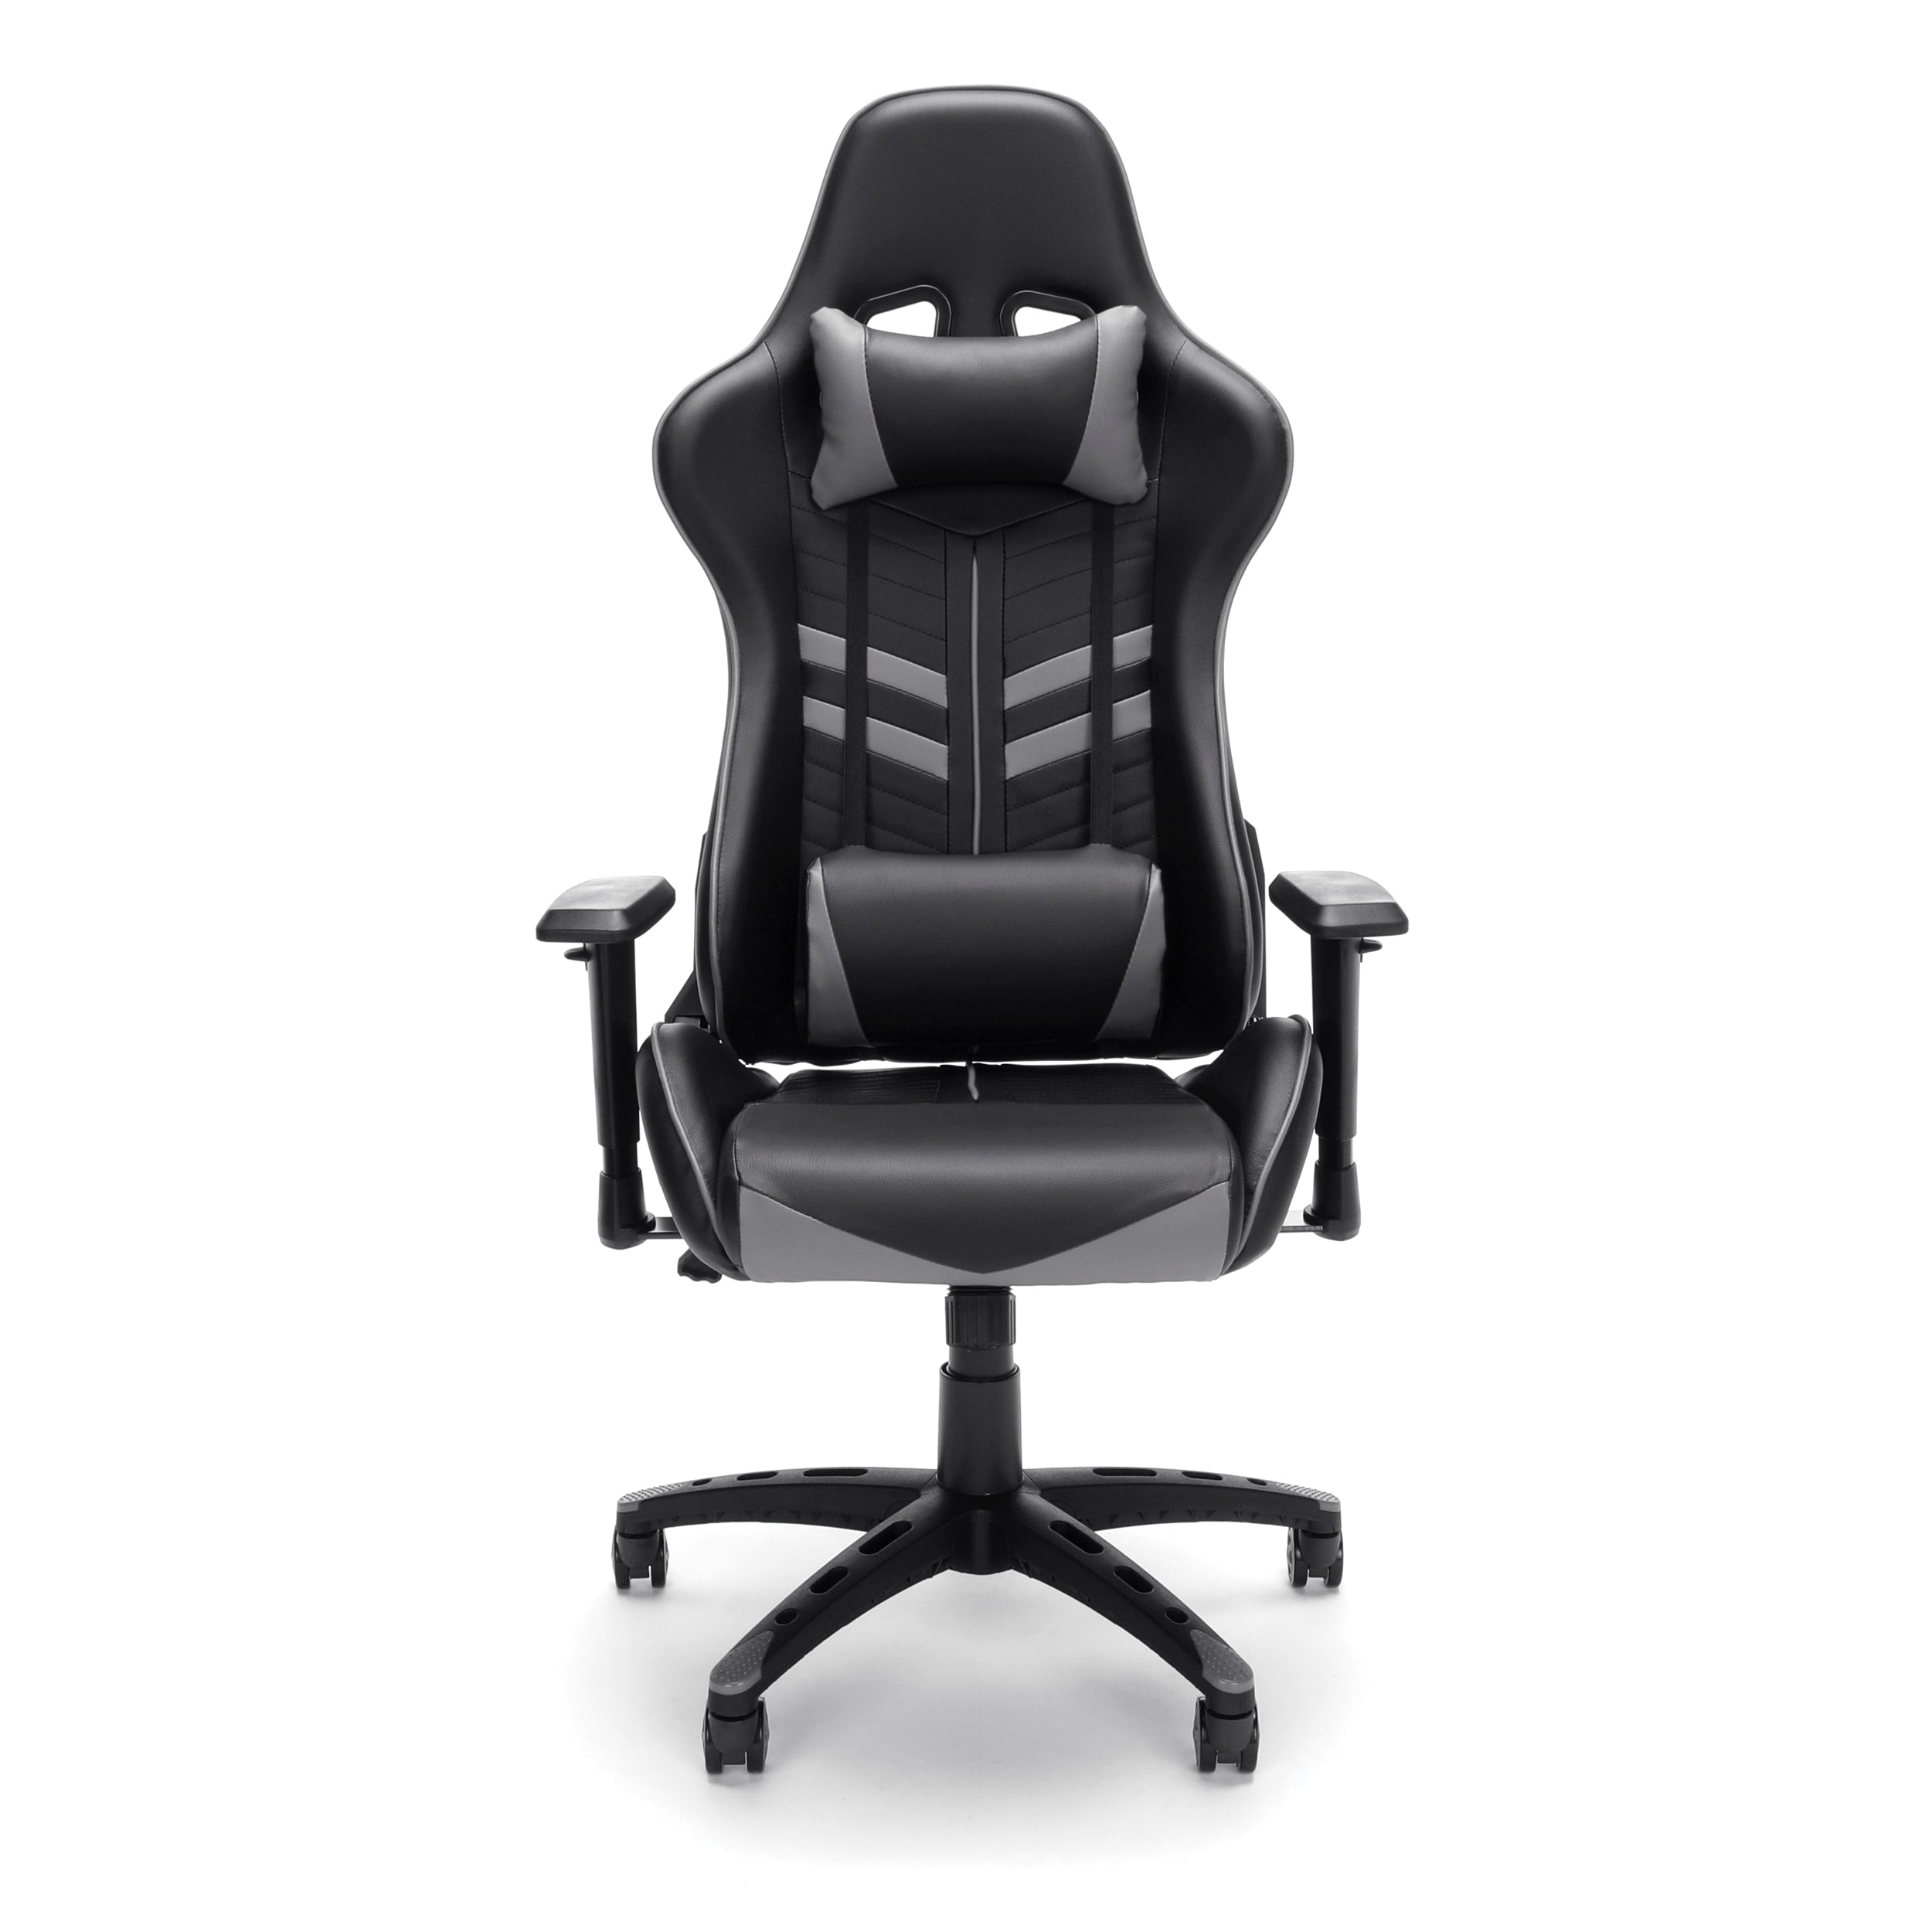 Height Adjustable Reclining Gaming Chair For Home Office Use Black and Gray